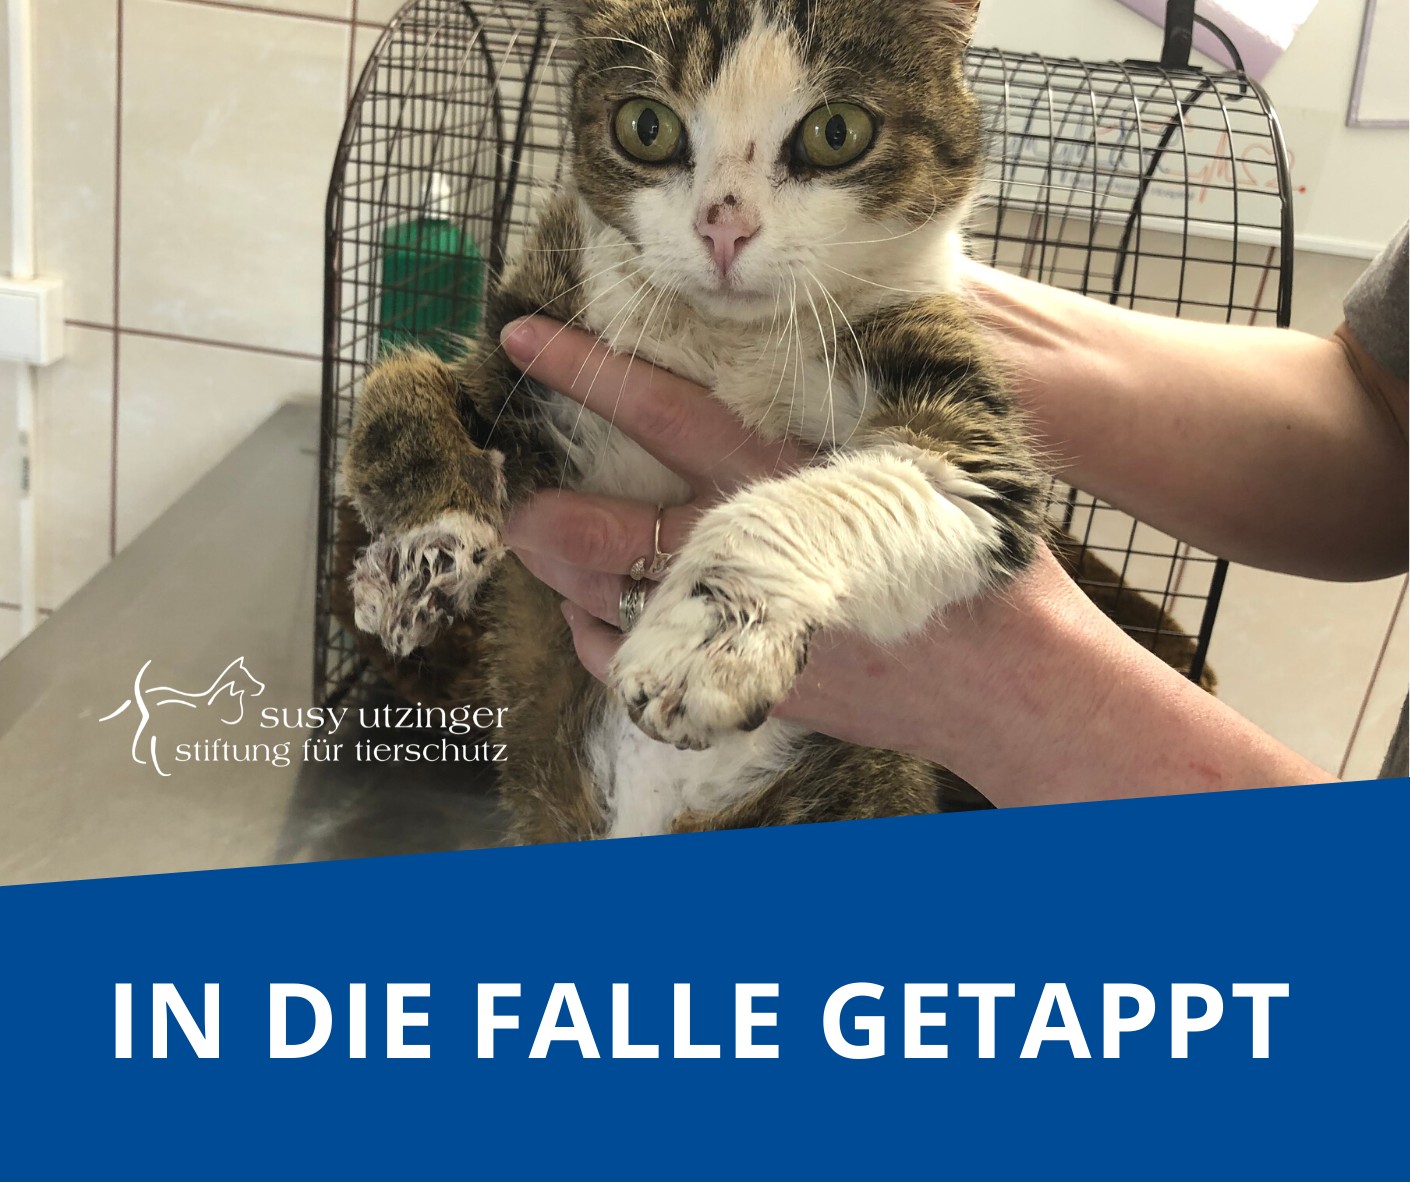 A touching story from the Orphan Animal Hospital in Galati